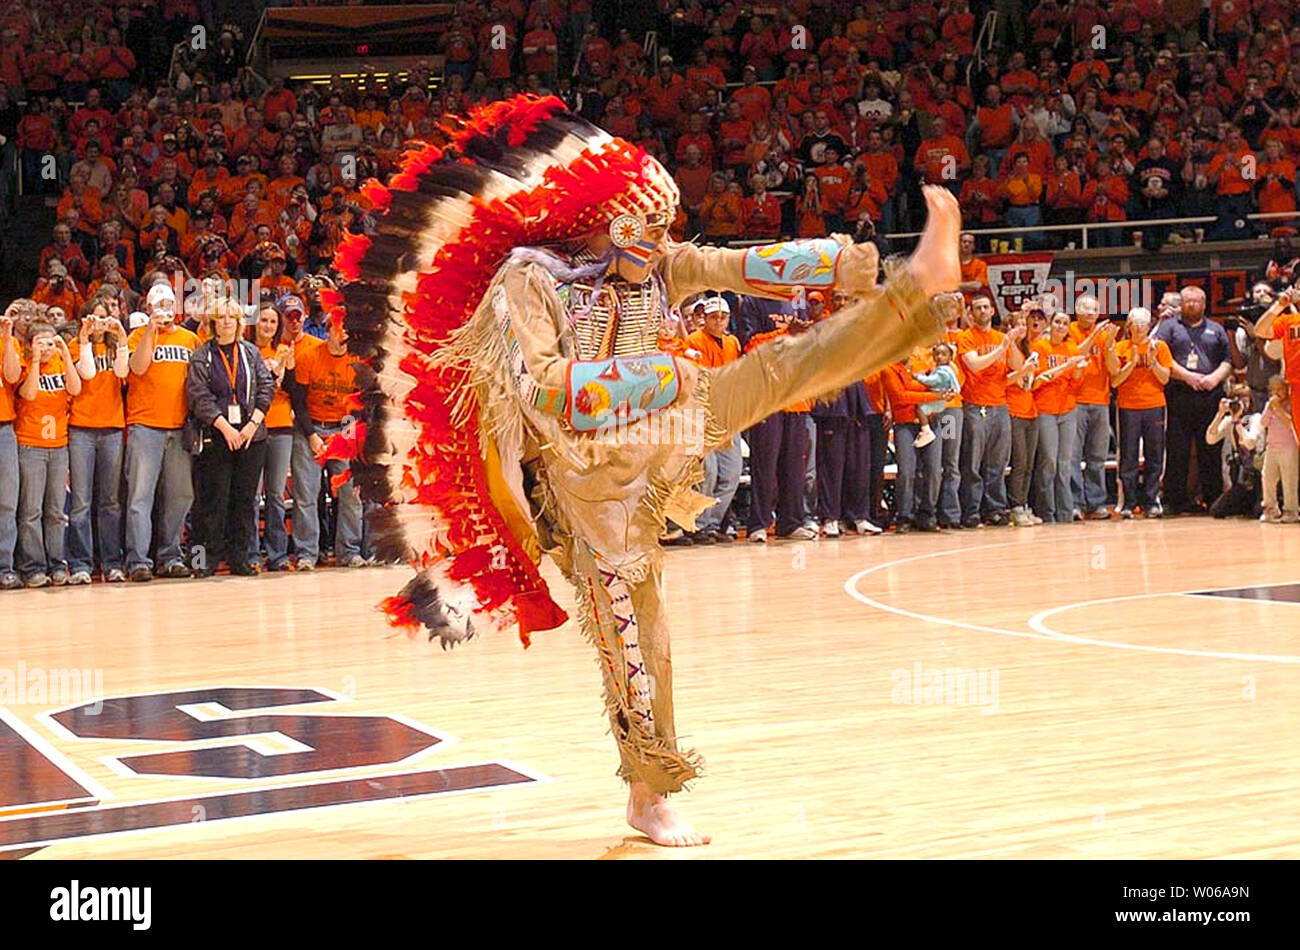 Chief Illiniwek The Mascot For The University Of Illinois For The Past